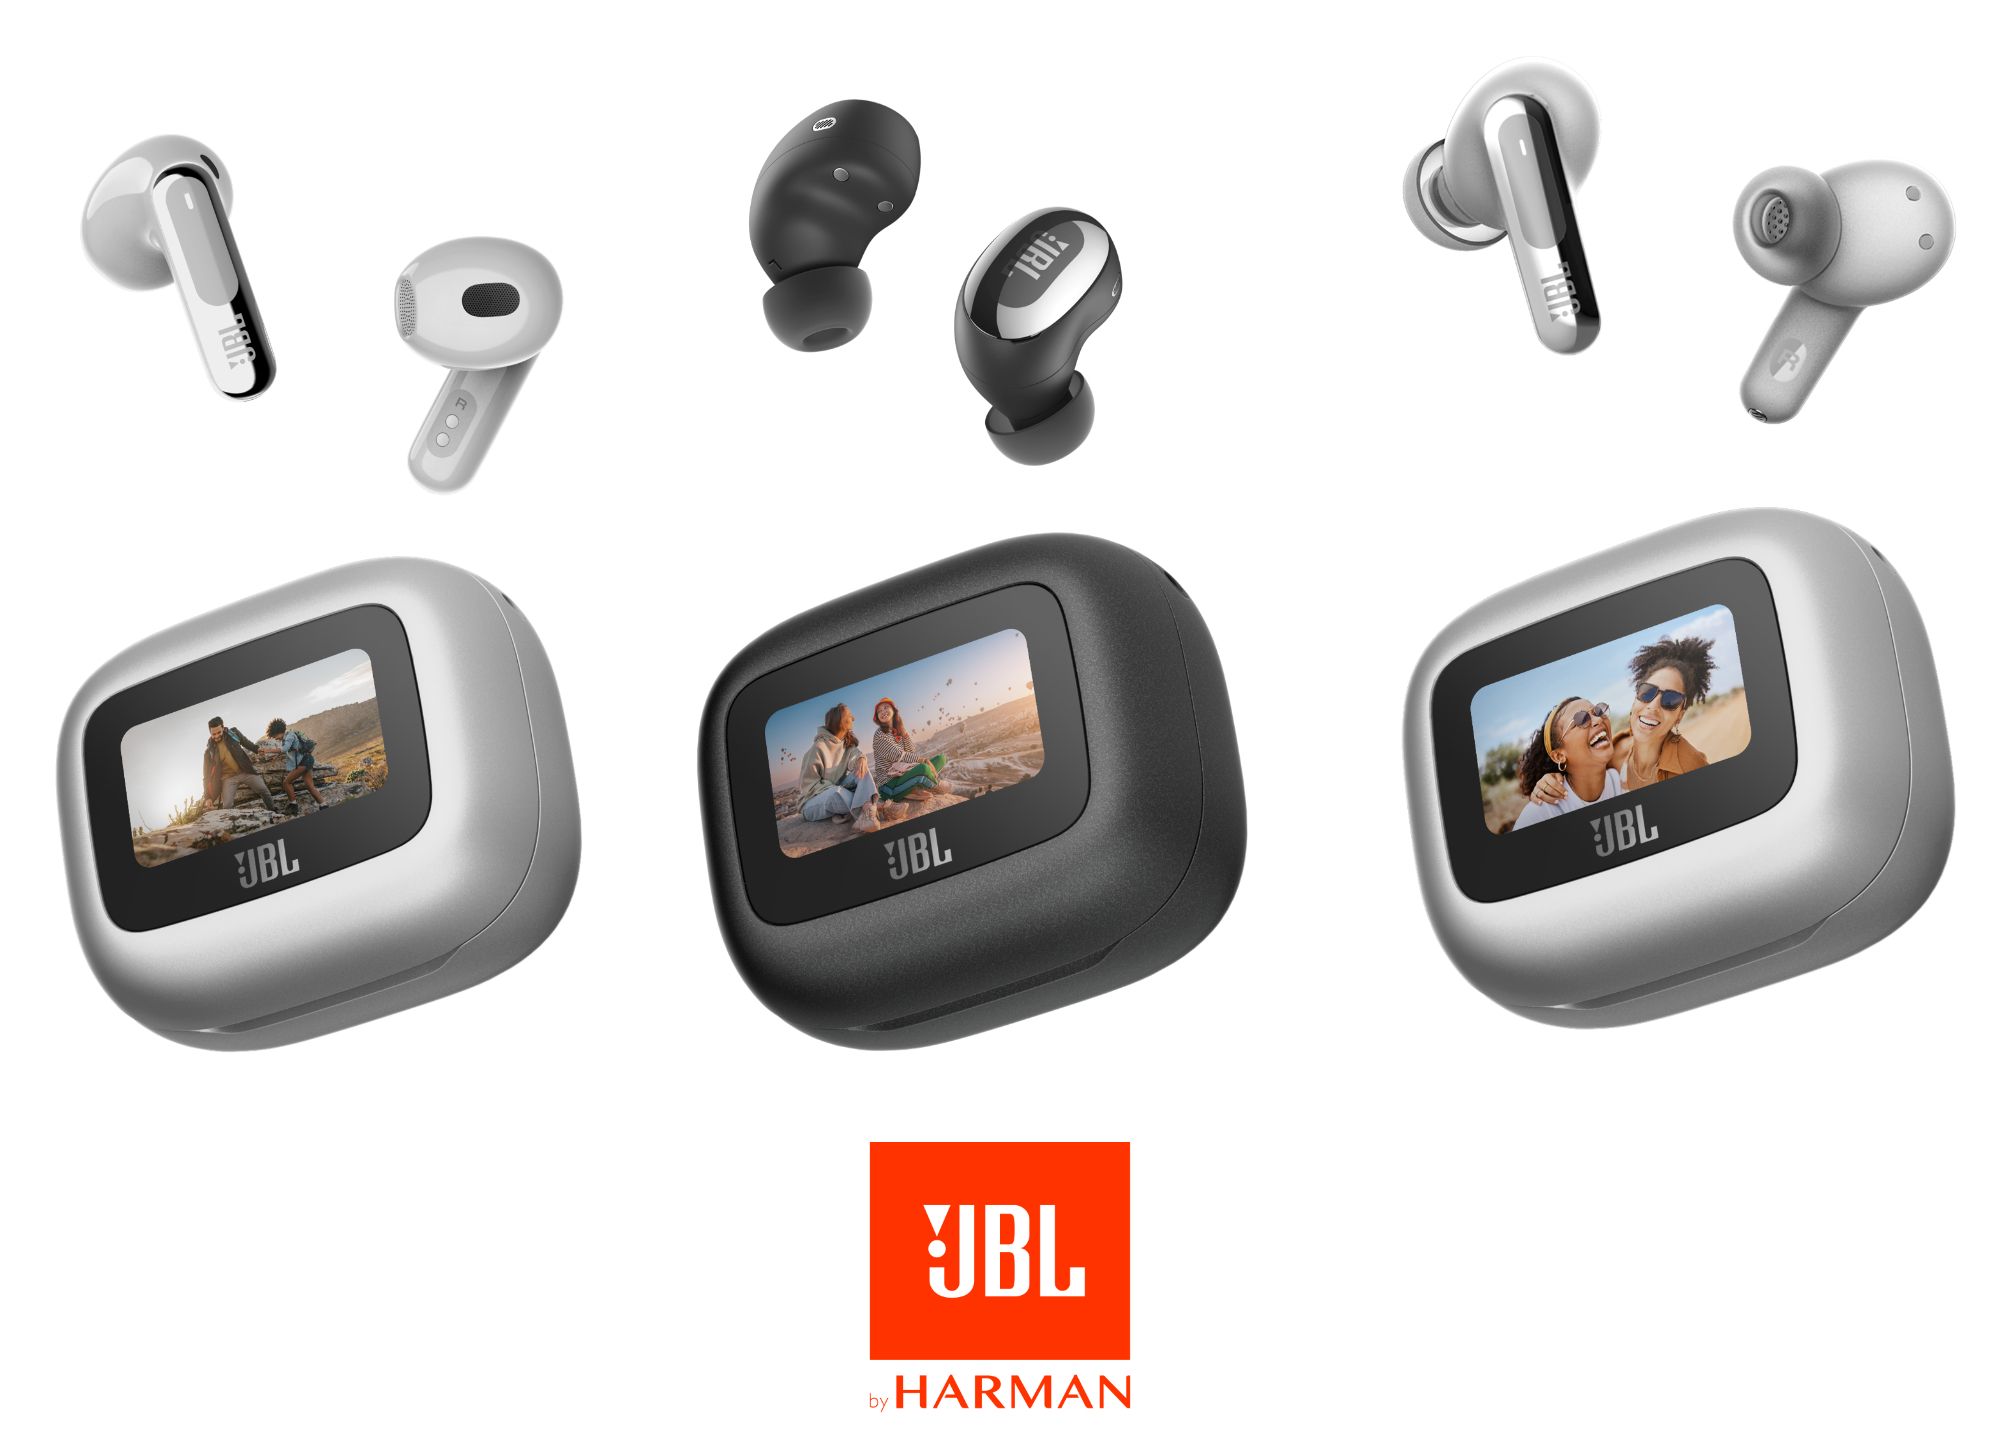 The JBL Live 3 earbuds expand popular touchscreen case with three earbud shapes